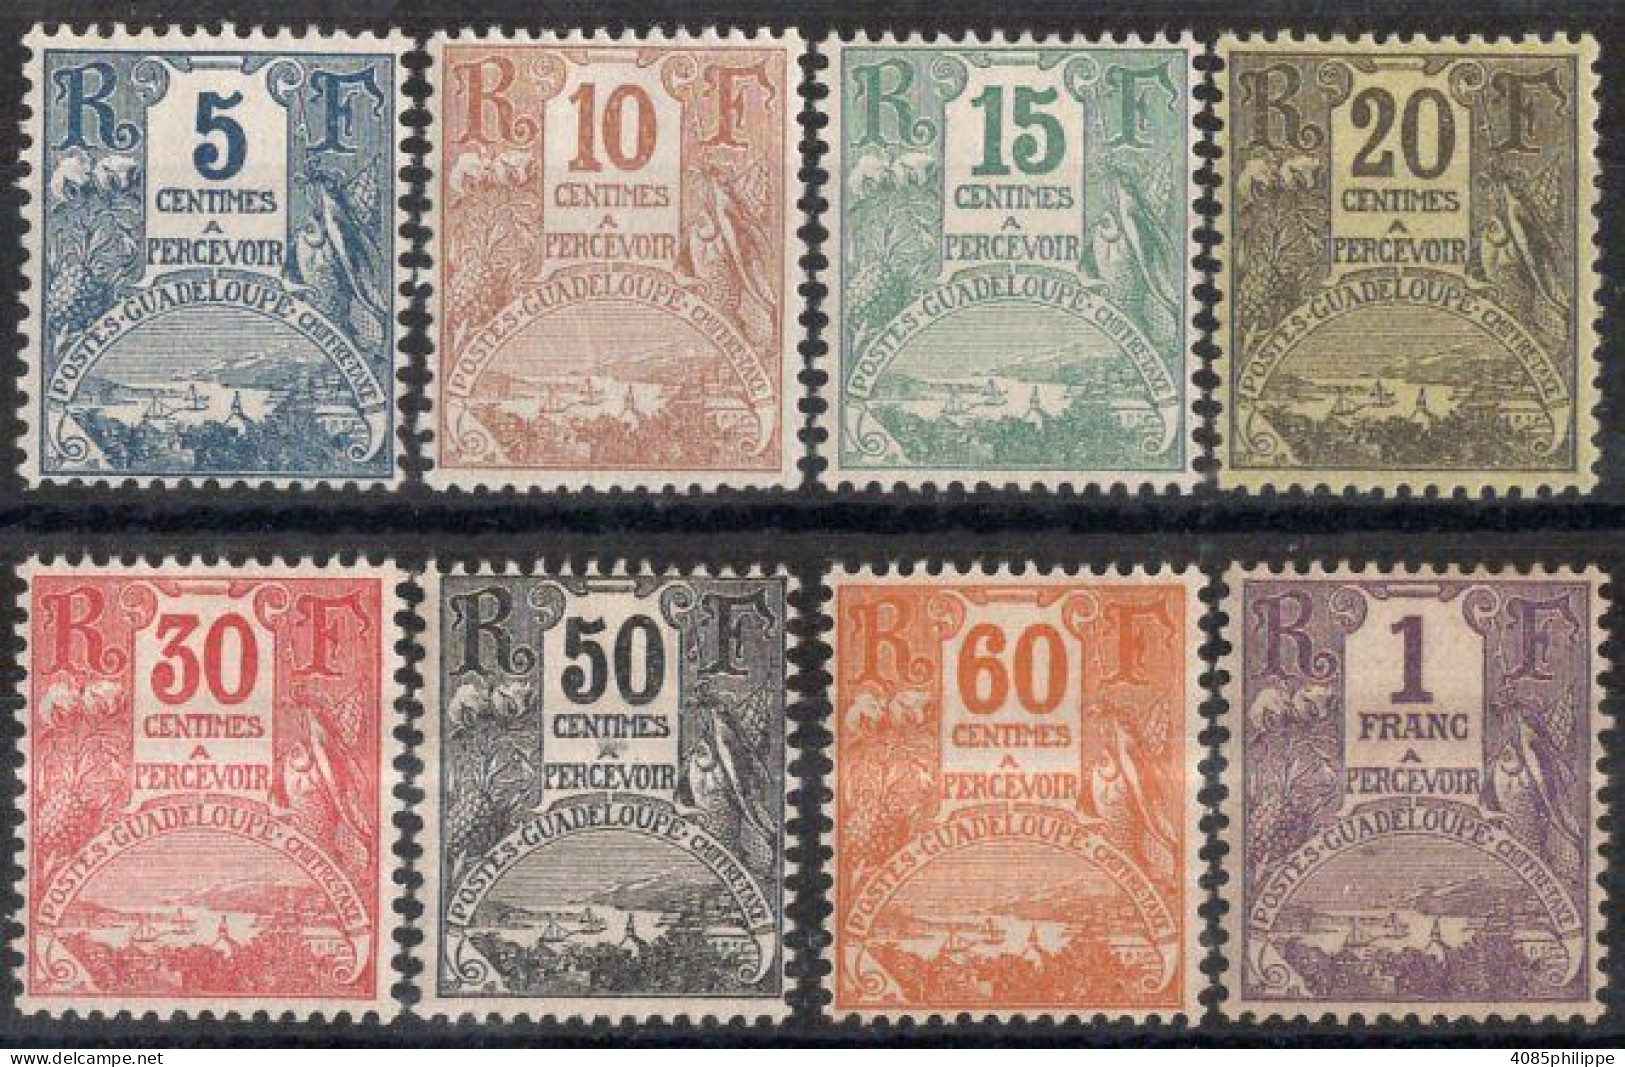 Guadeloupe Timbres-Taxe N°15 à 22* Neufs Charnières TB Cote 19€00 - Timbres-taxe